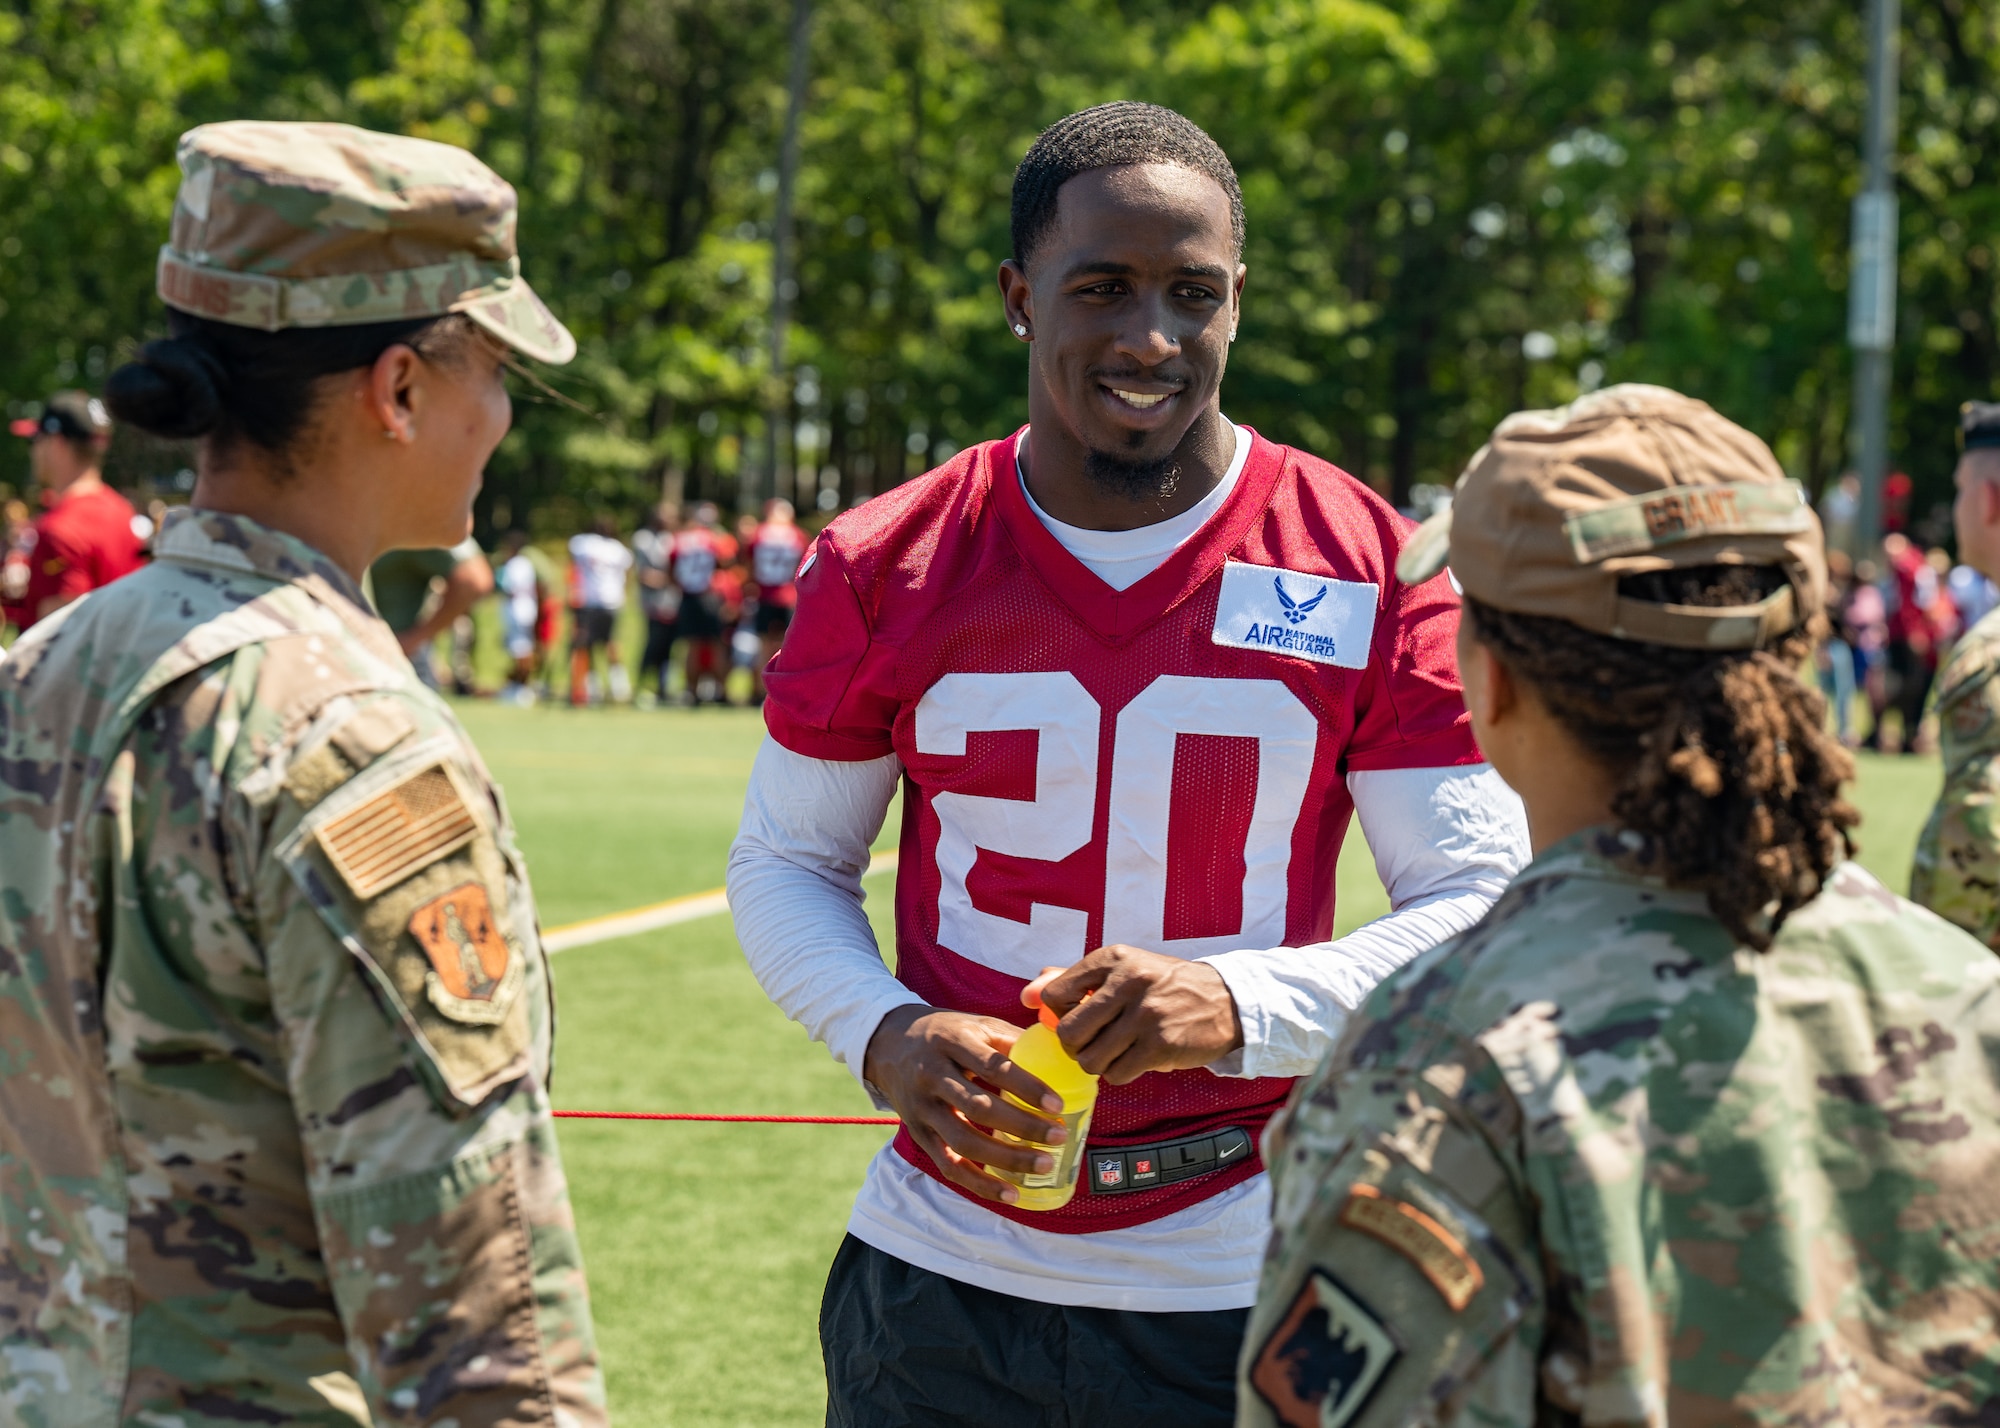 Jartavius Martin, center, defensive back, Washington Commanders football team, speaks to U.S. Air Force Master Sgt. Tatiana Collins, left, Air National Guard (ANG) marketing and advertising non-commissioned officer, National Guard Bureau (NGB), and Master Sgt. Jasmine Grant, ANG events NCO, NGB, during an open practice held at Joint Base Andrews, Maryland, Aug. 25, 2023. As part of a partnership between the Washington Commanders and U.S. Air Force, an Air National Guard patch will be featured on the Commanders defensive players’ practice jerseys this season to help garner exposure for recruiting the next generation of Airmen. (U.S. Air National Guard photo by Tech. Sgt. Sarah M. McClanahan)